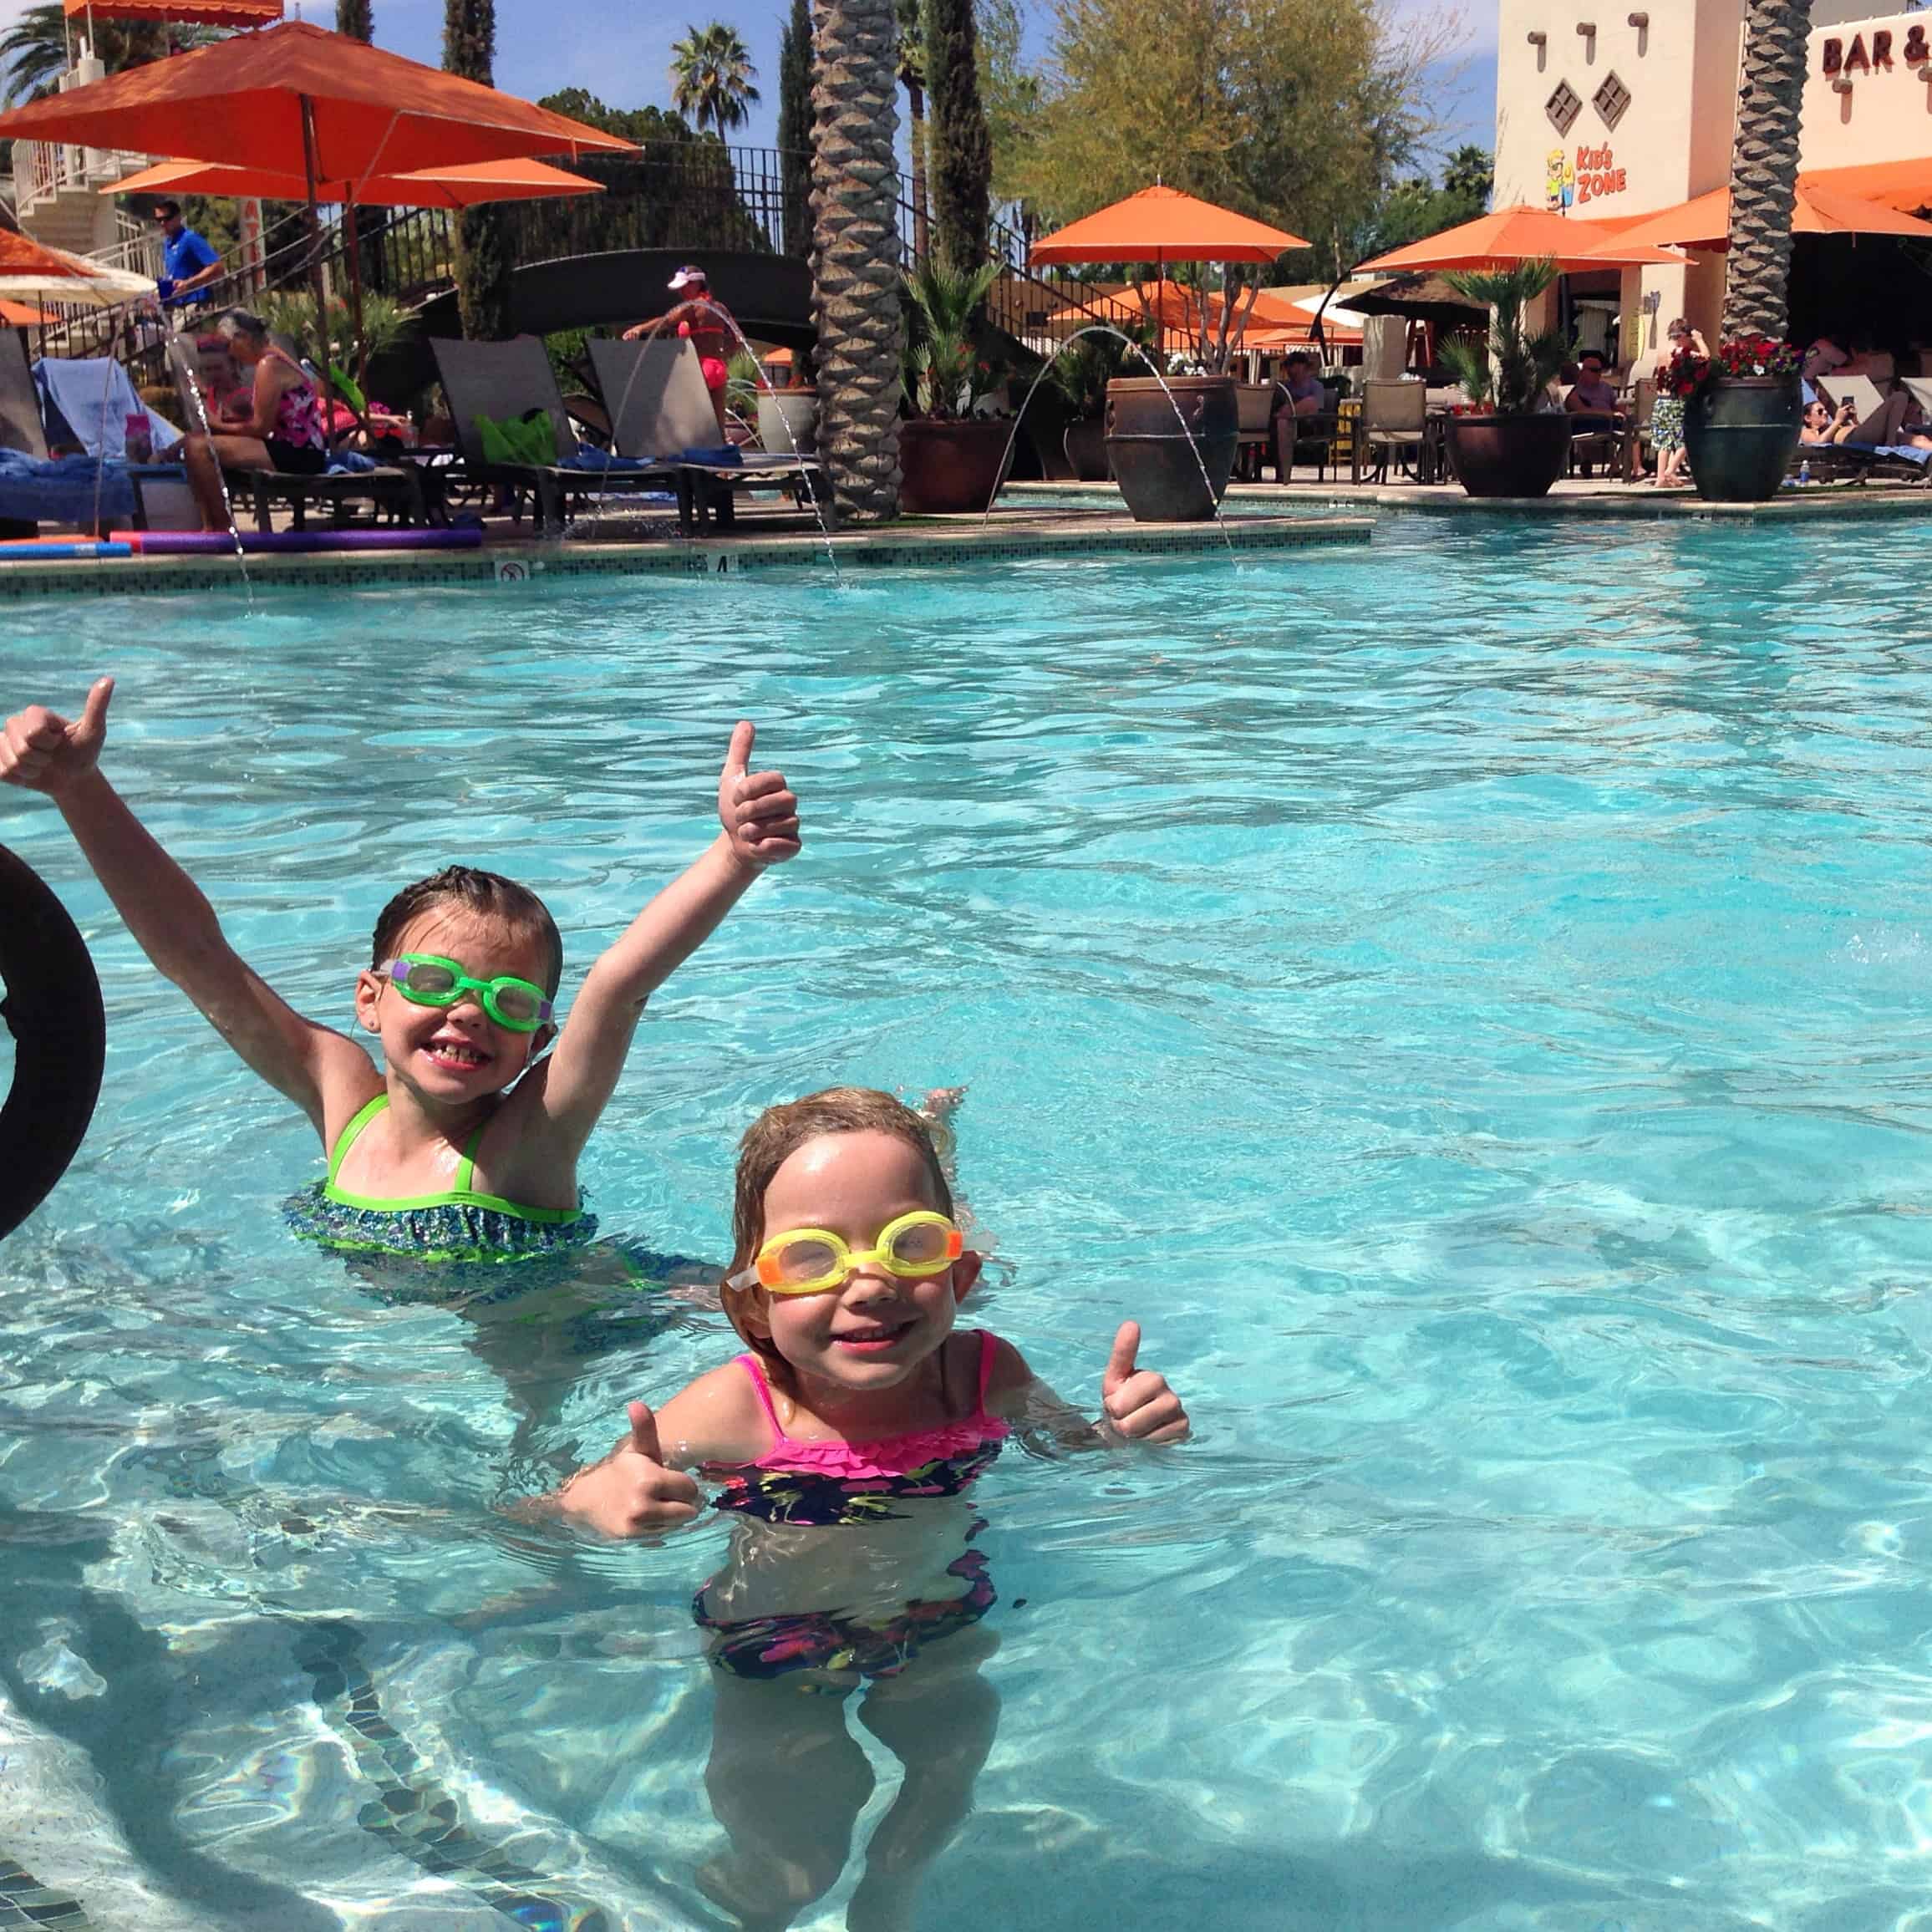 kids love the wigwam resort, it's one of the best family resorts in the Phoenix area.